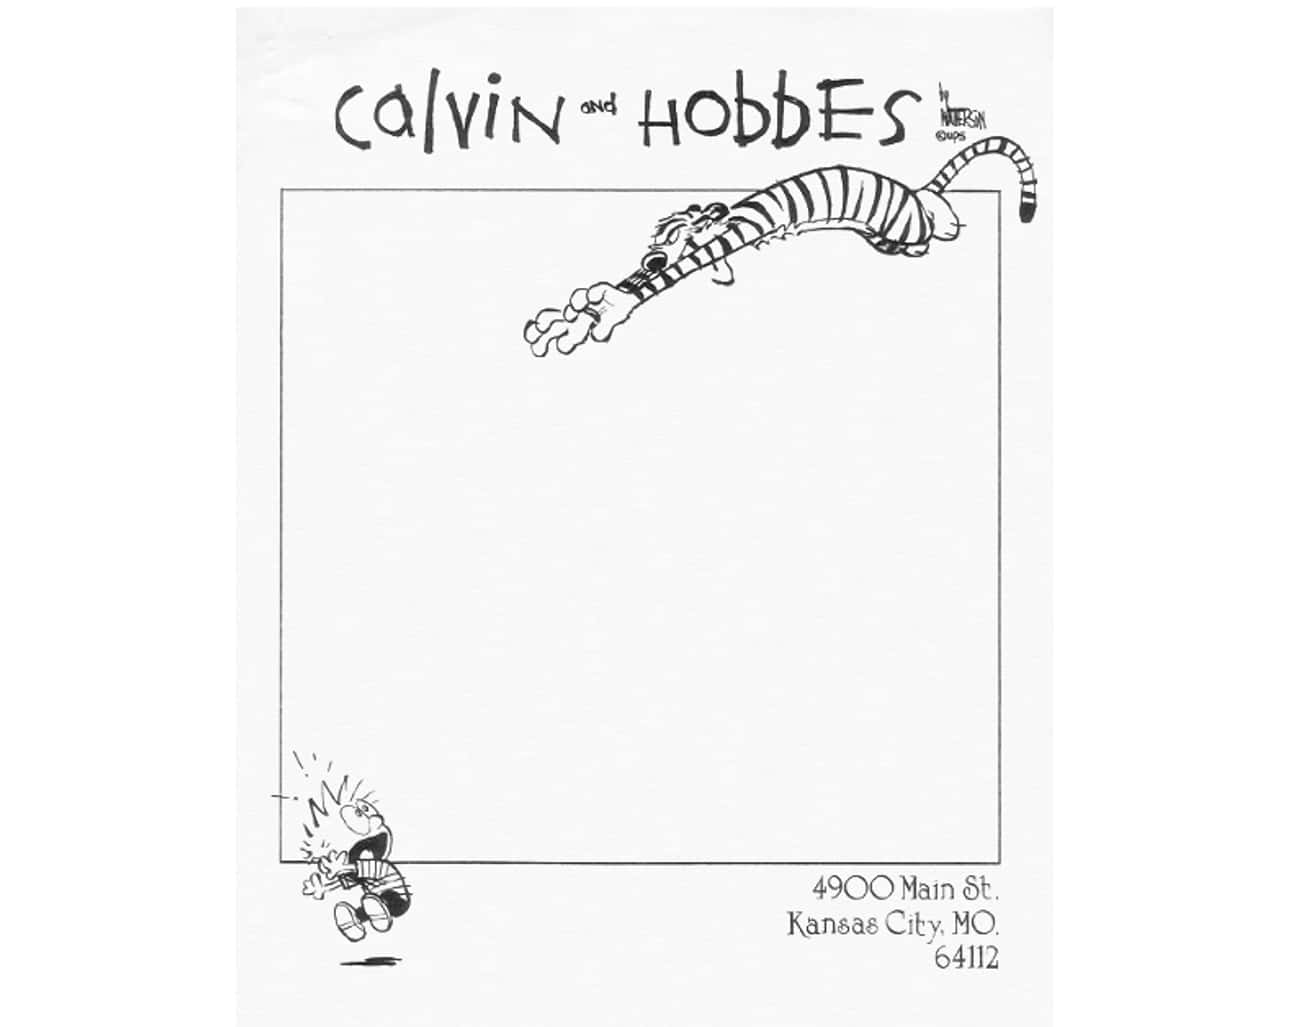 Calvin and Hobbes Chase Each Other Around Cartoonist Bill Watterson&#39;s Letterhead